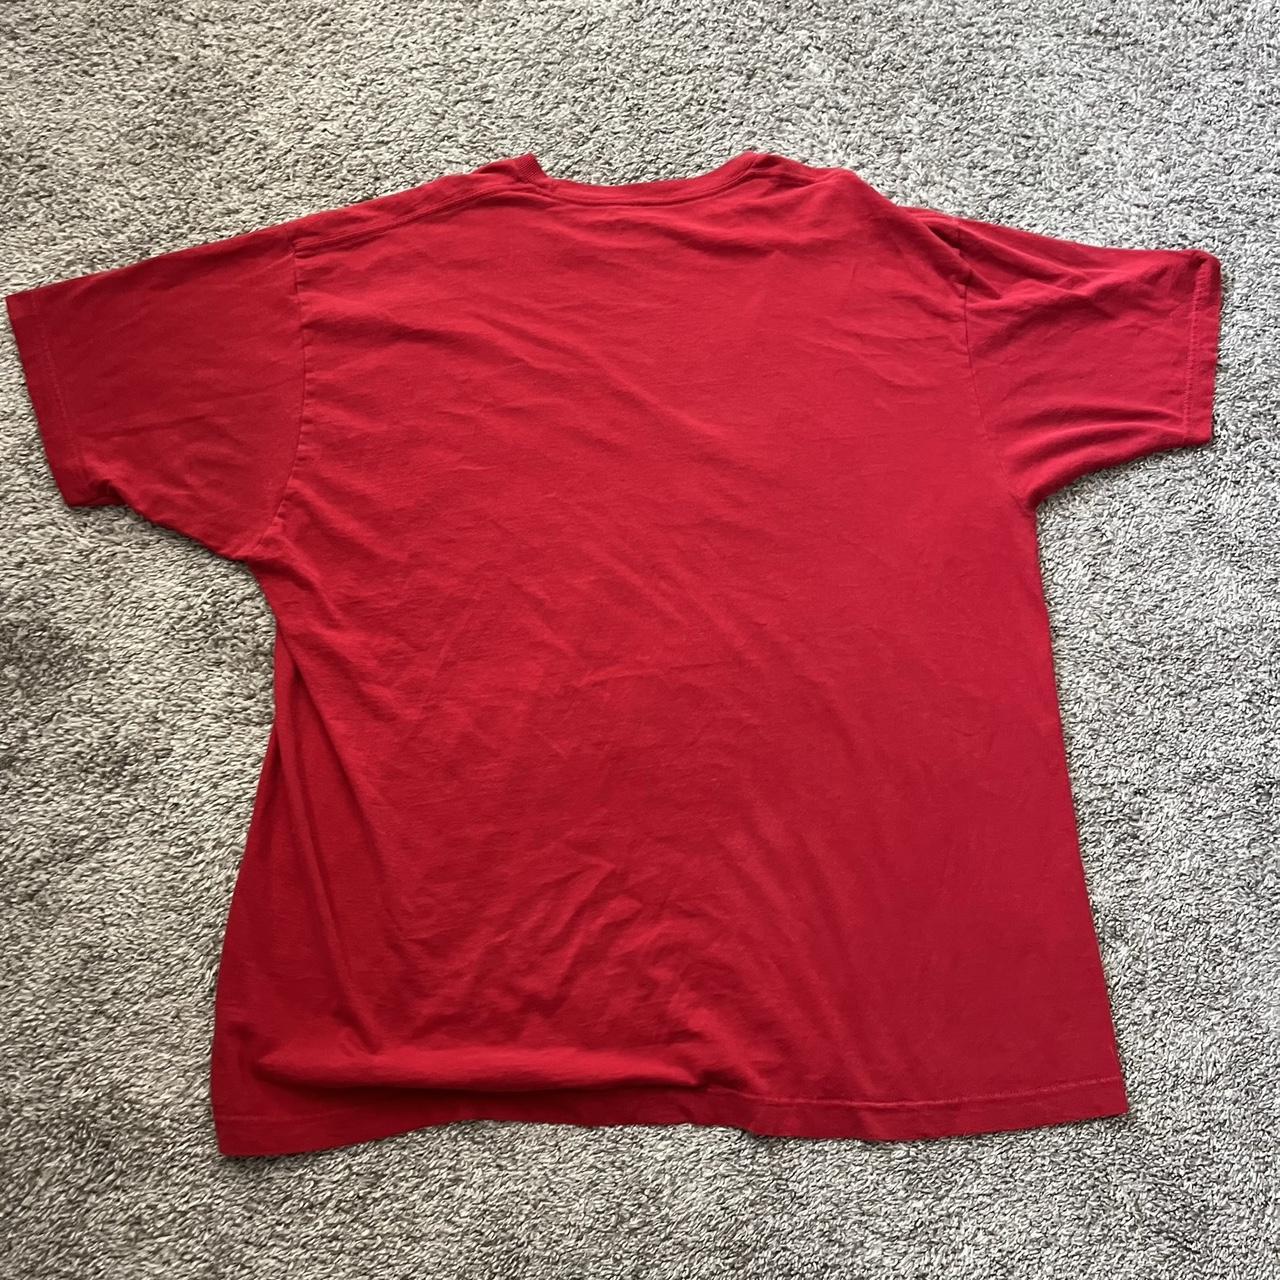 Super sick 2000s baggy ecko tee, dm me with any... - Depop